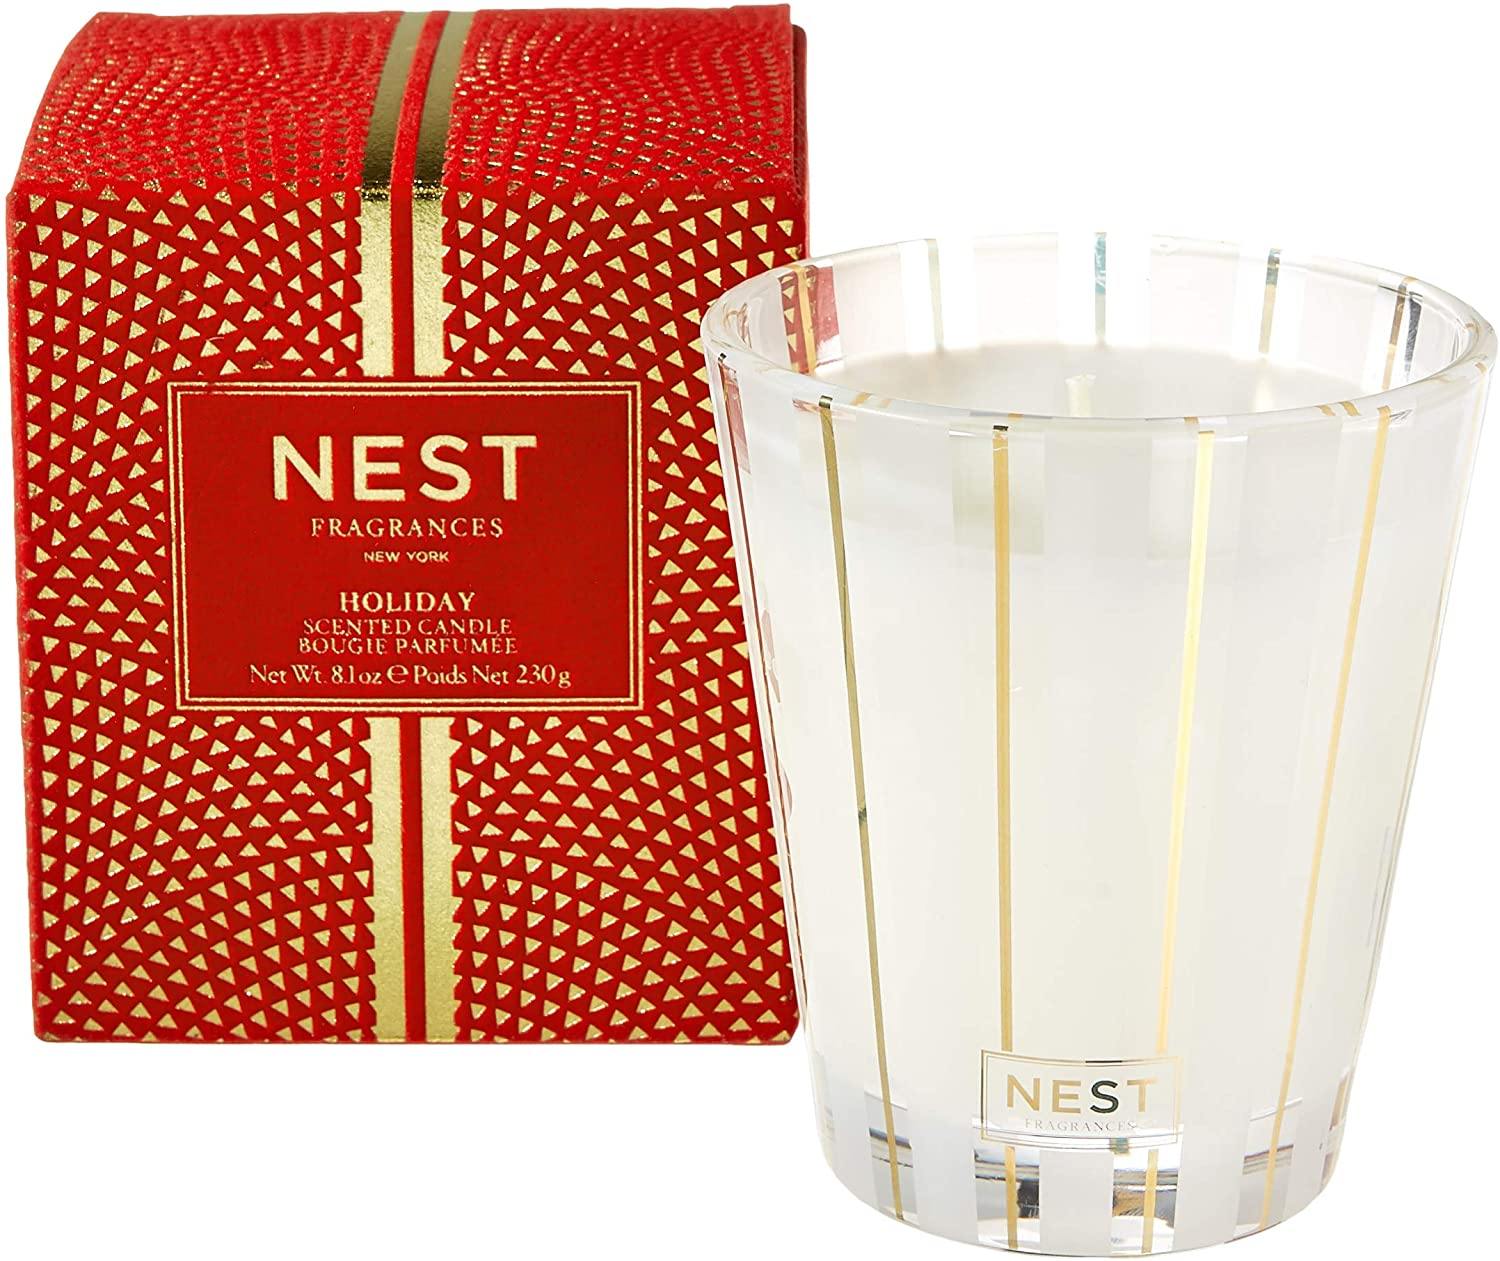 Nest Fragrances Holiday Candle - ScentGiant